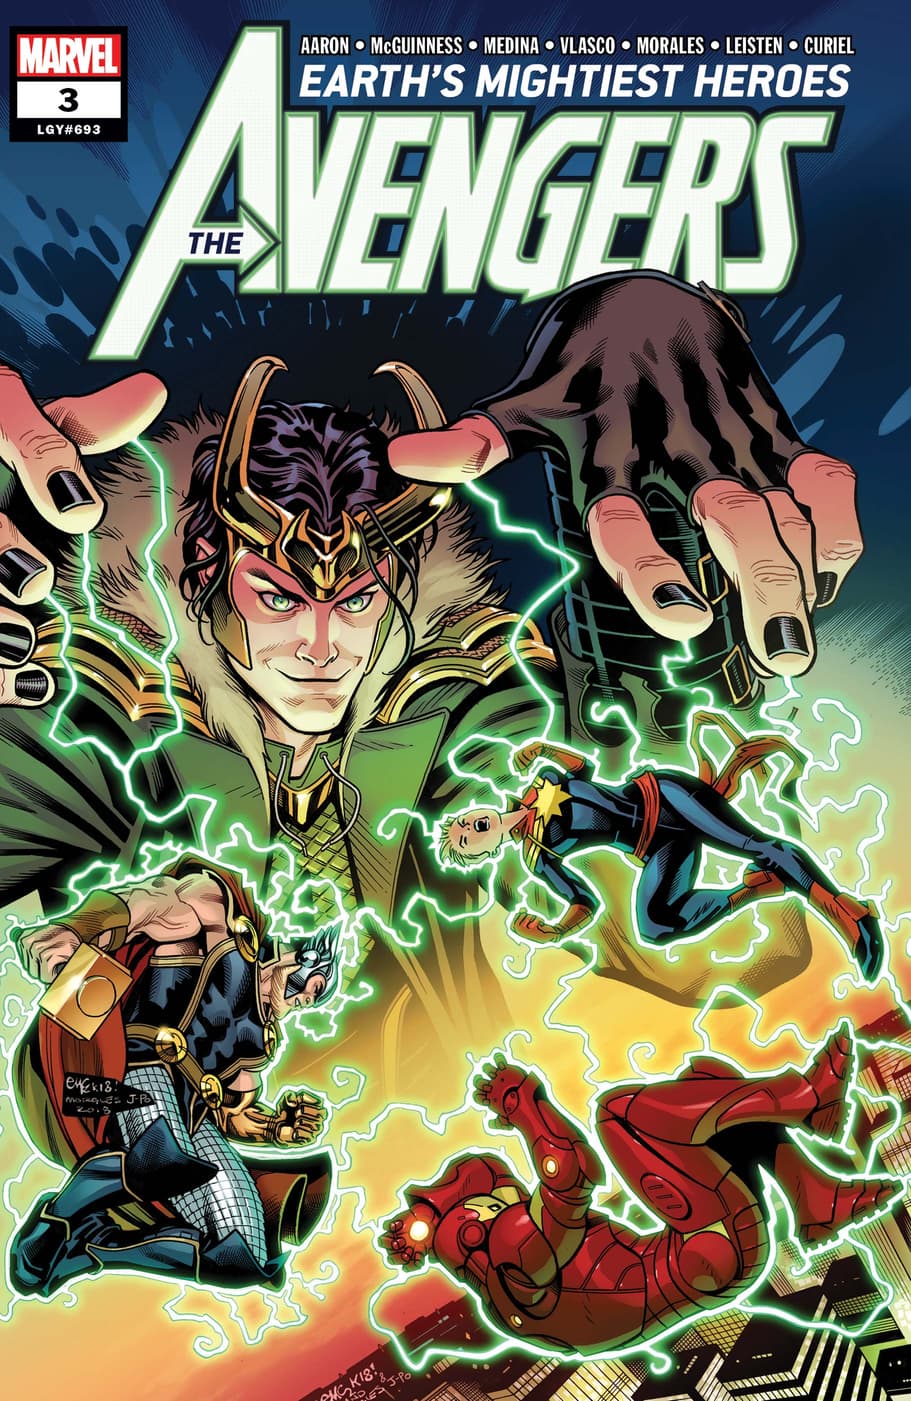 AVENGERS (2018) #3 cover by Ed McGuinness